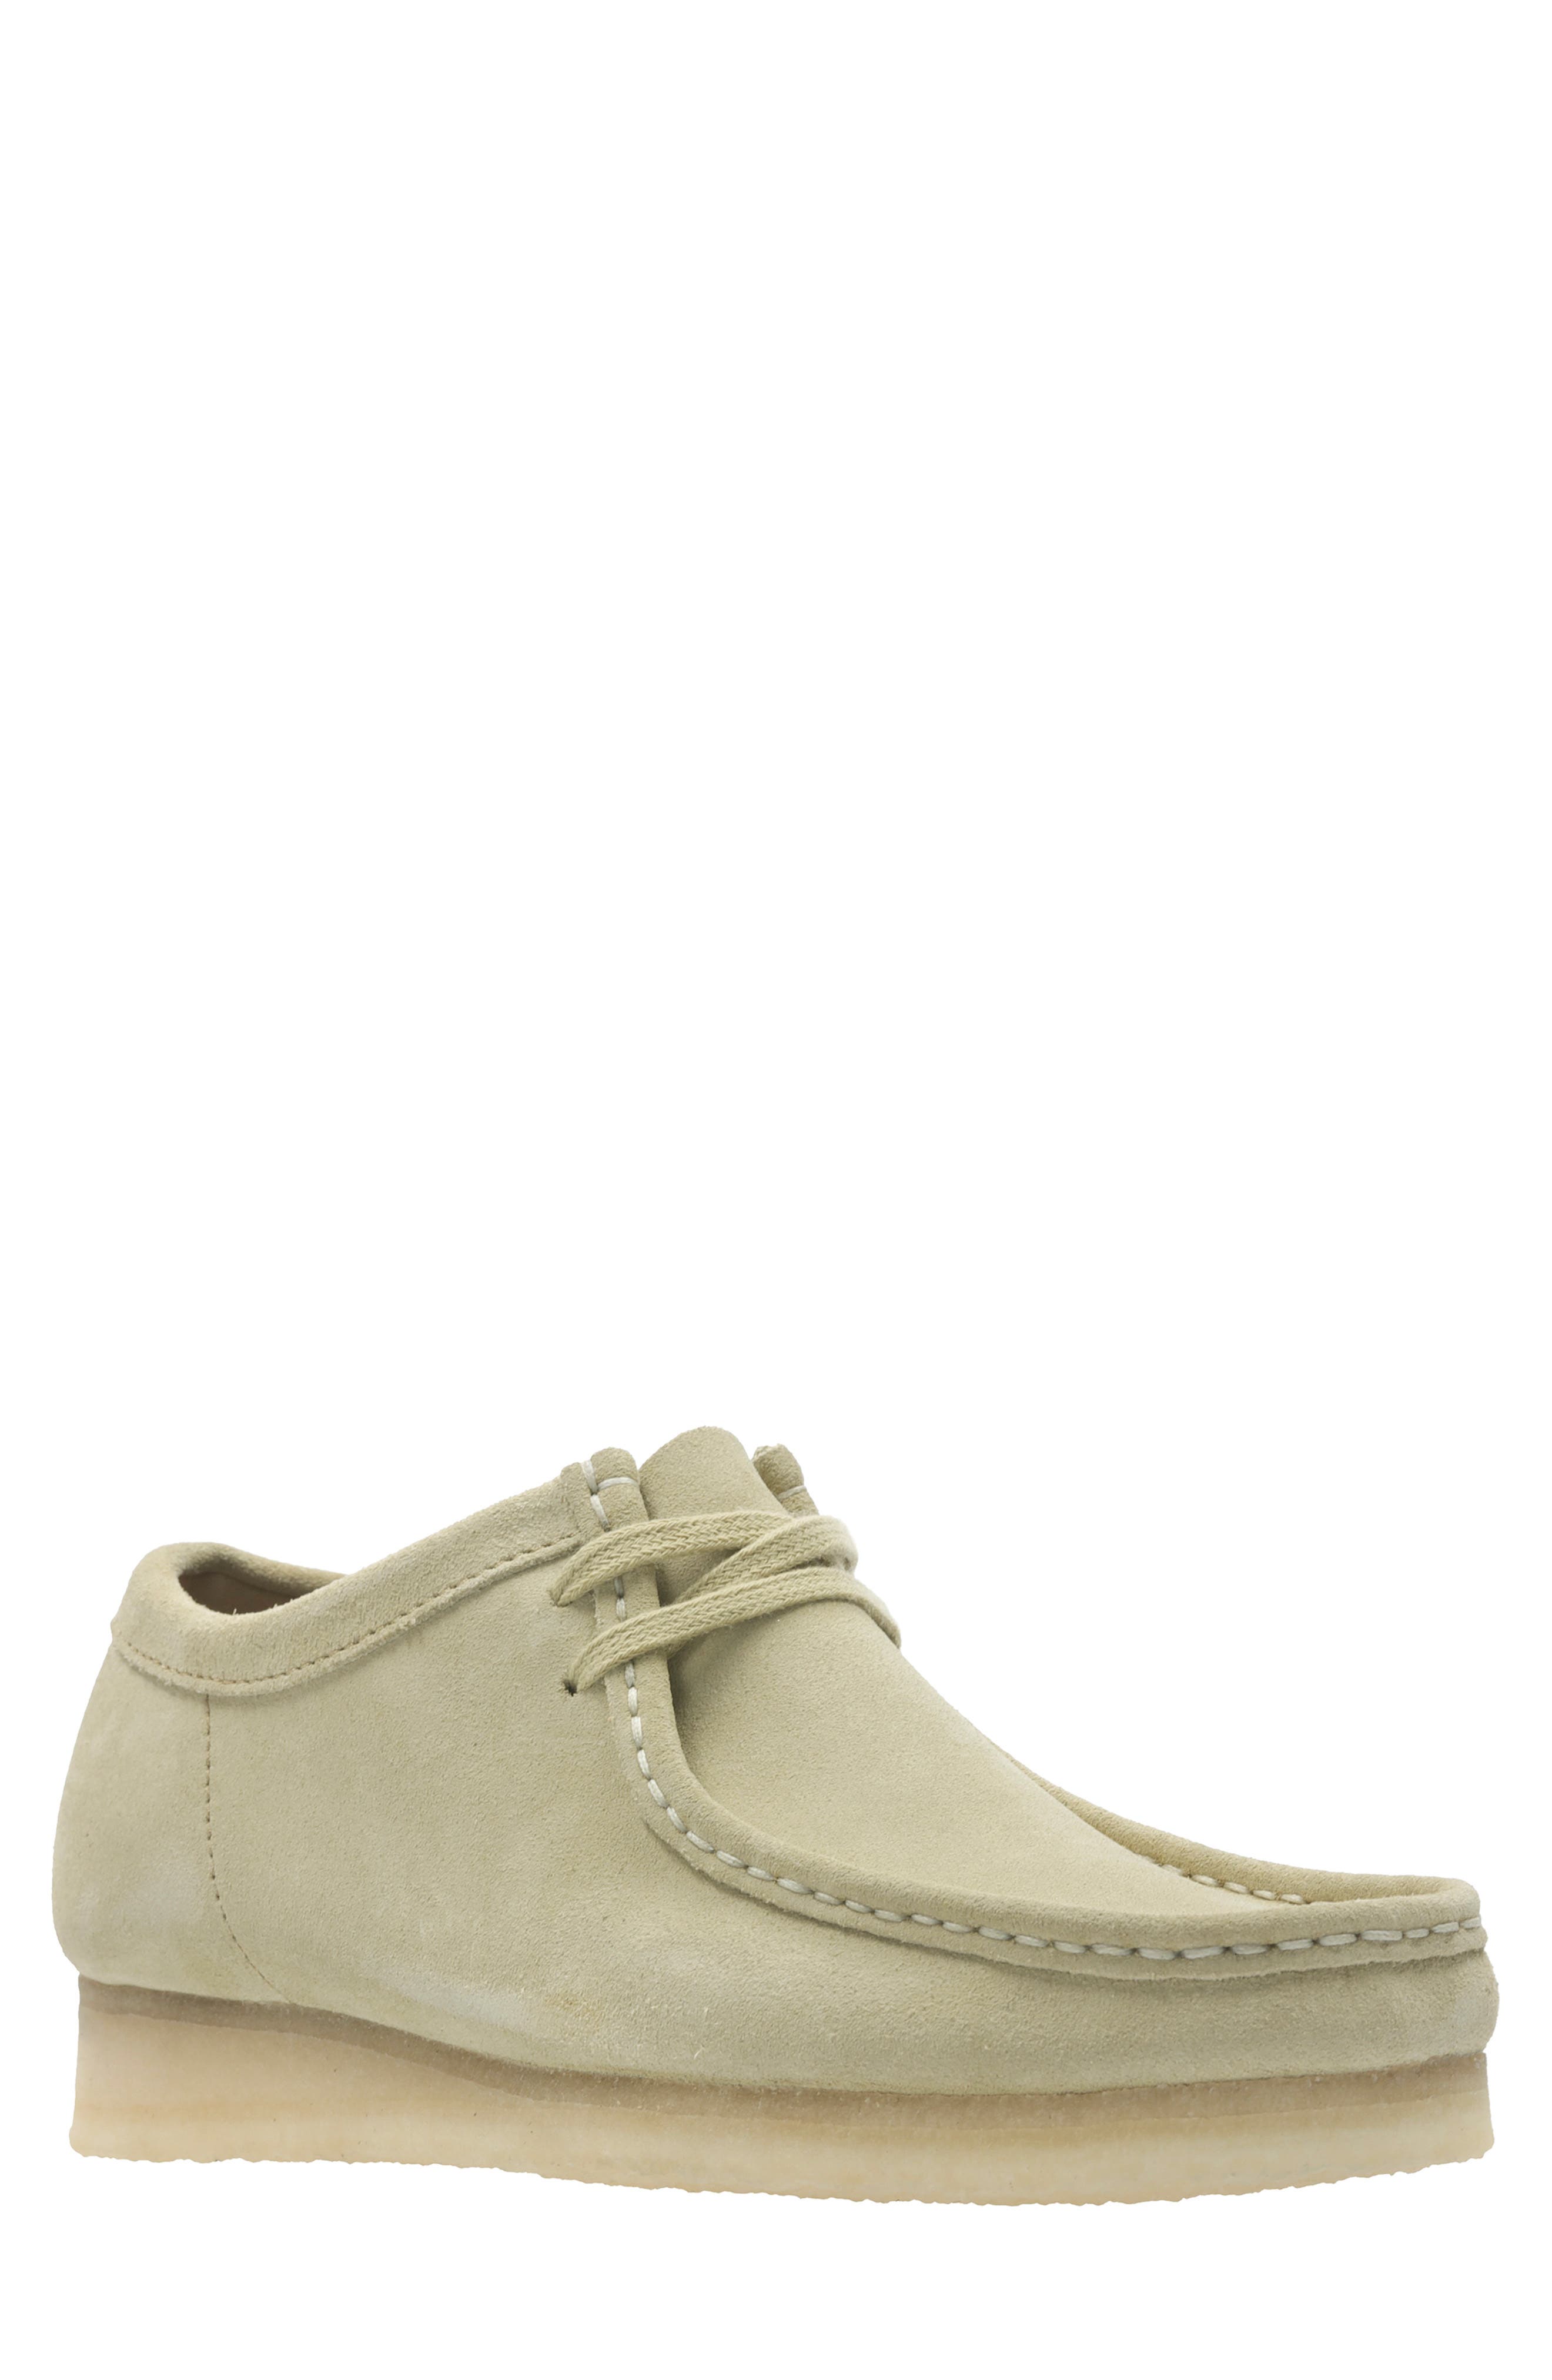 toddler wallabee clarks